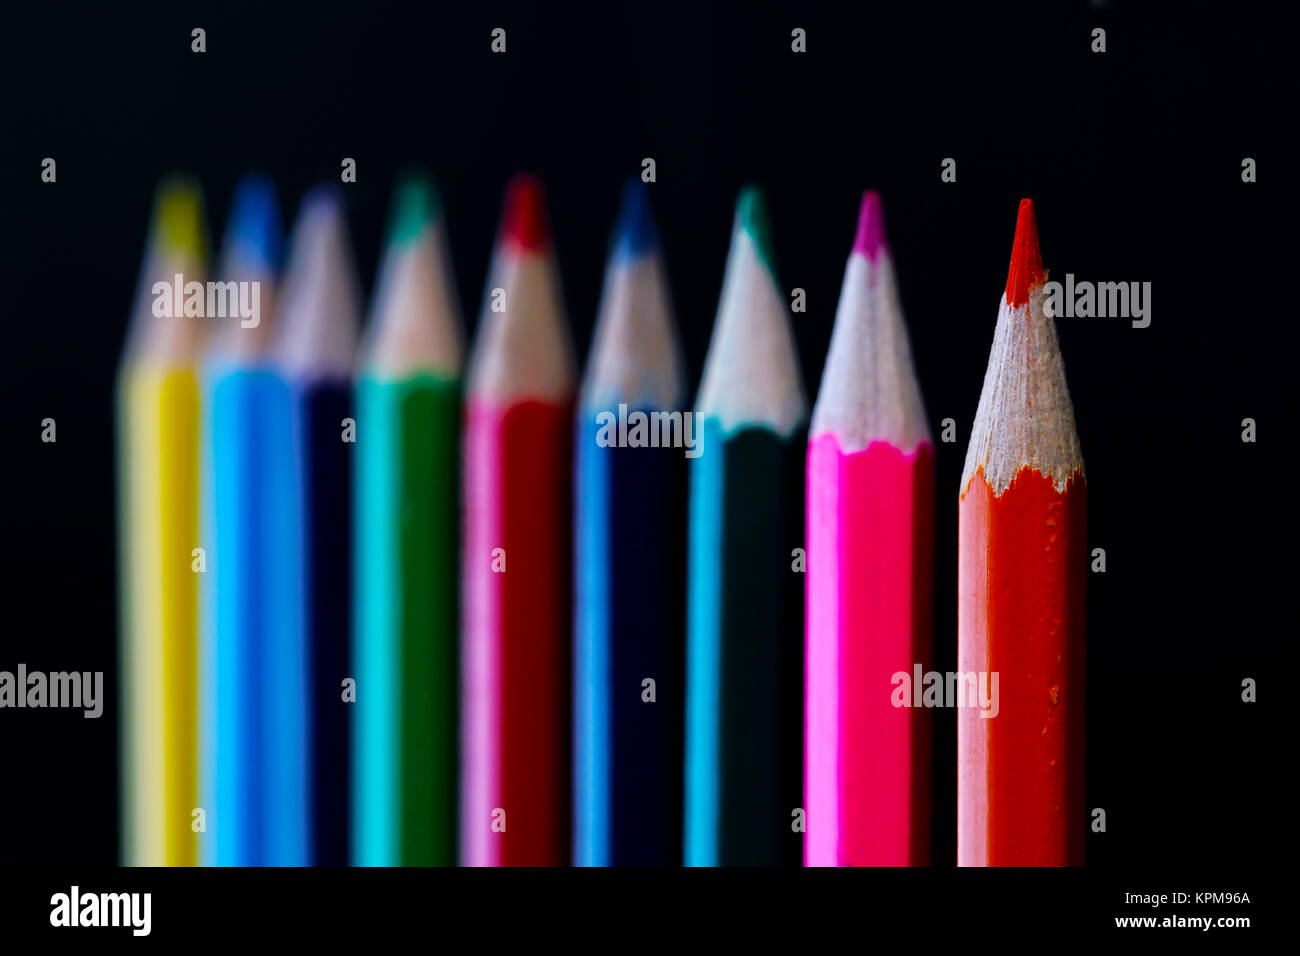 Collection of colored pencils on black background. Stock Photo